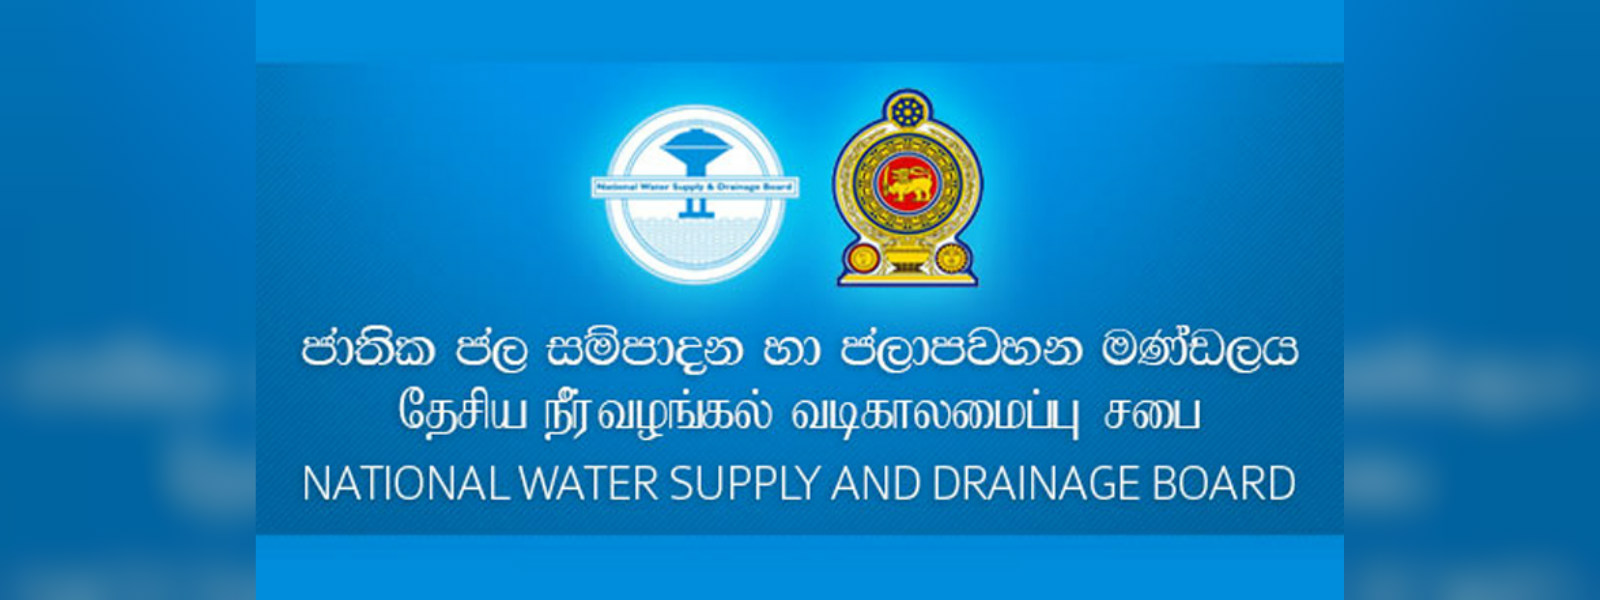 NWSDB begins SMS service for water cuts